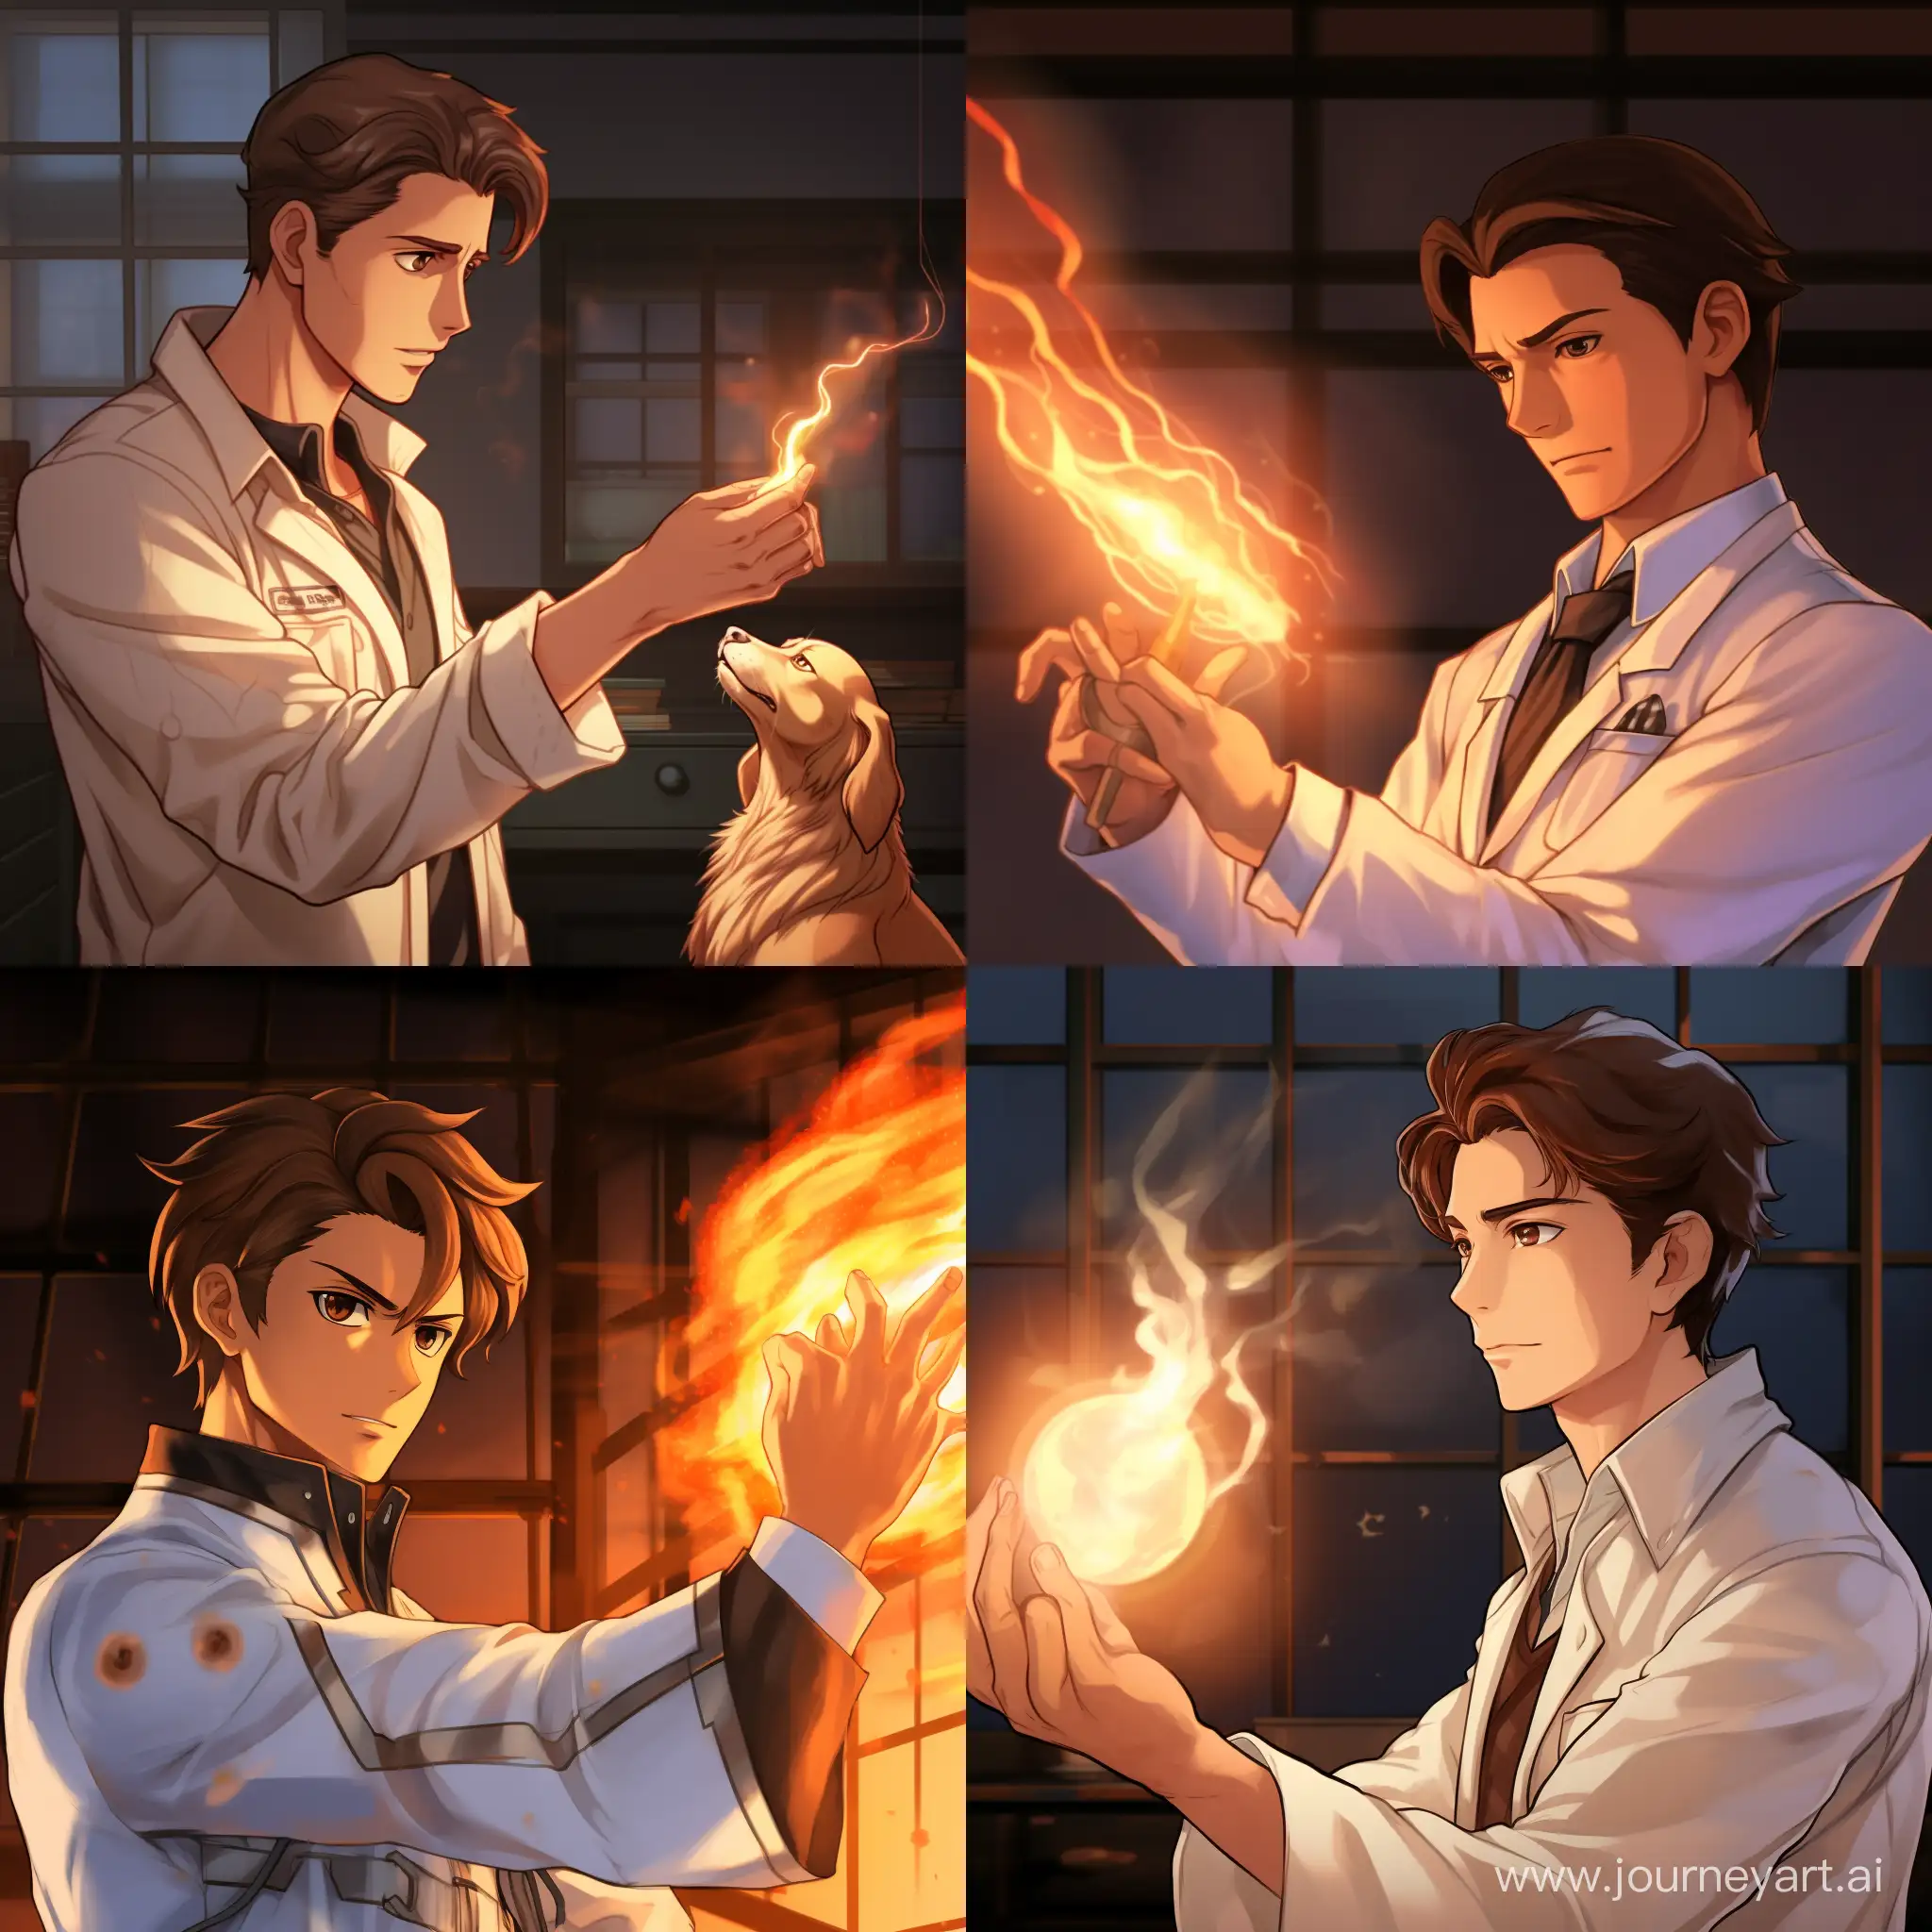 Anime style image. Man in lab coat and brown hair. He has a small flame levitating above his right hand and not touching it. He is analyzing the fire with a device that is in his other hand.